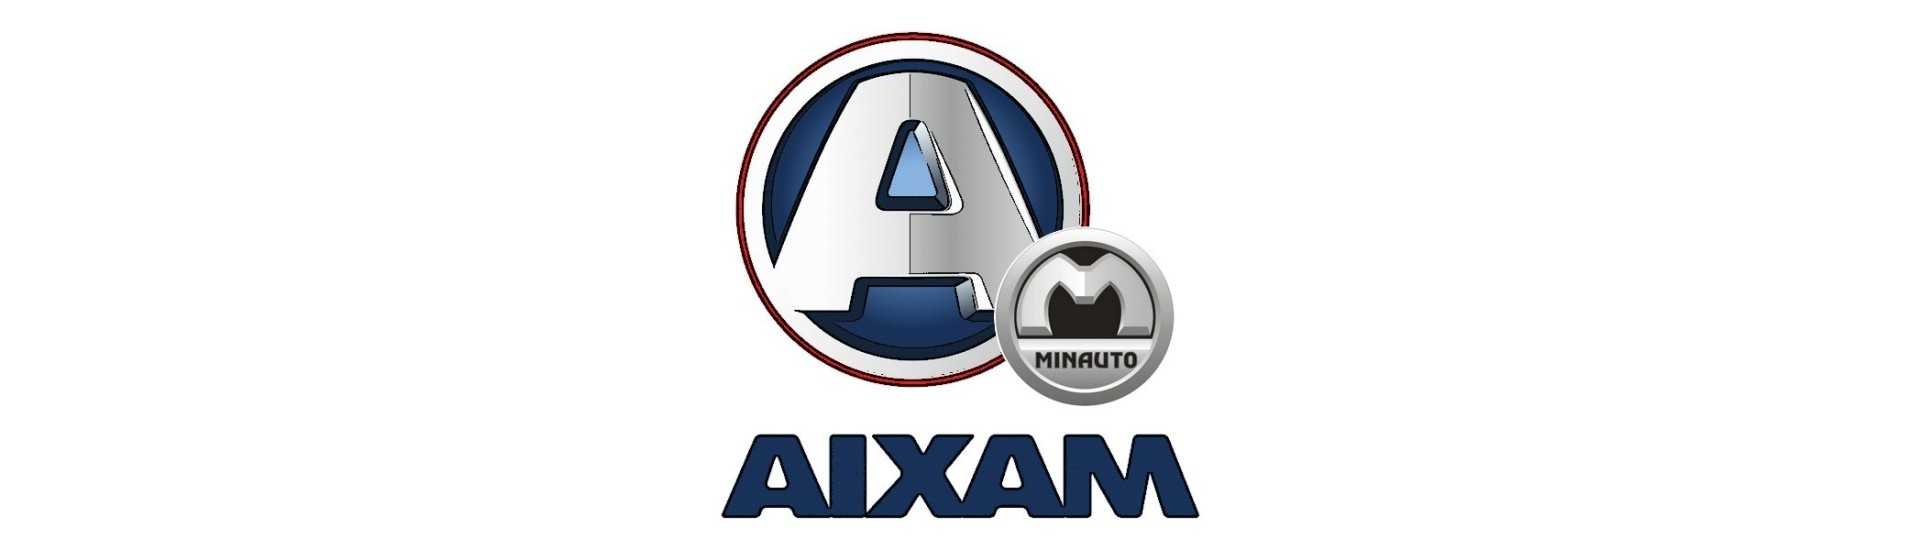 Tank core at the best car price without a permit Aixam Minauto